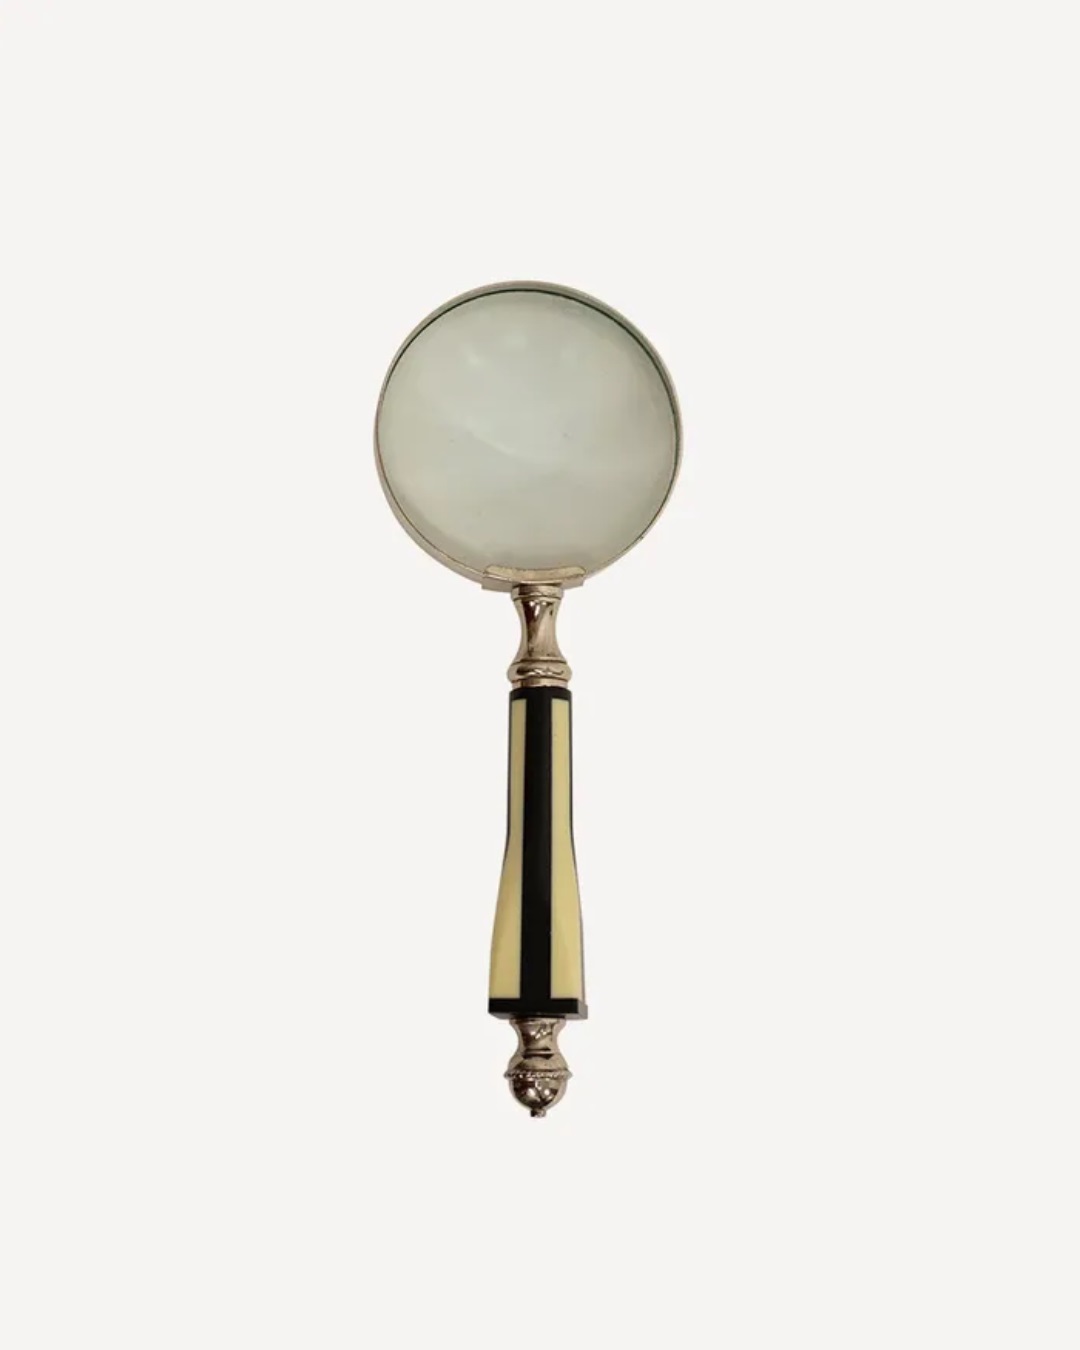 Black and white bone magnifying glass